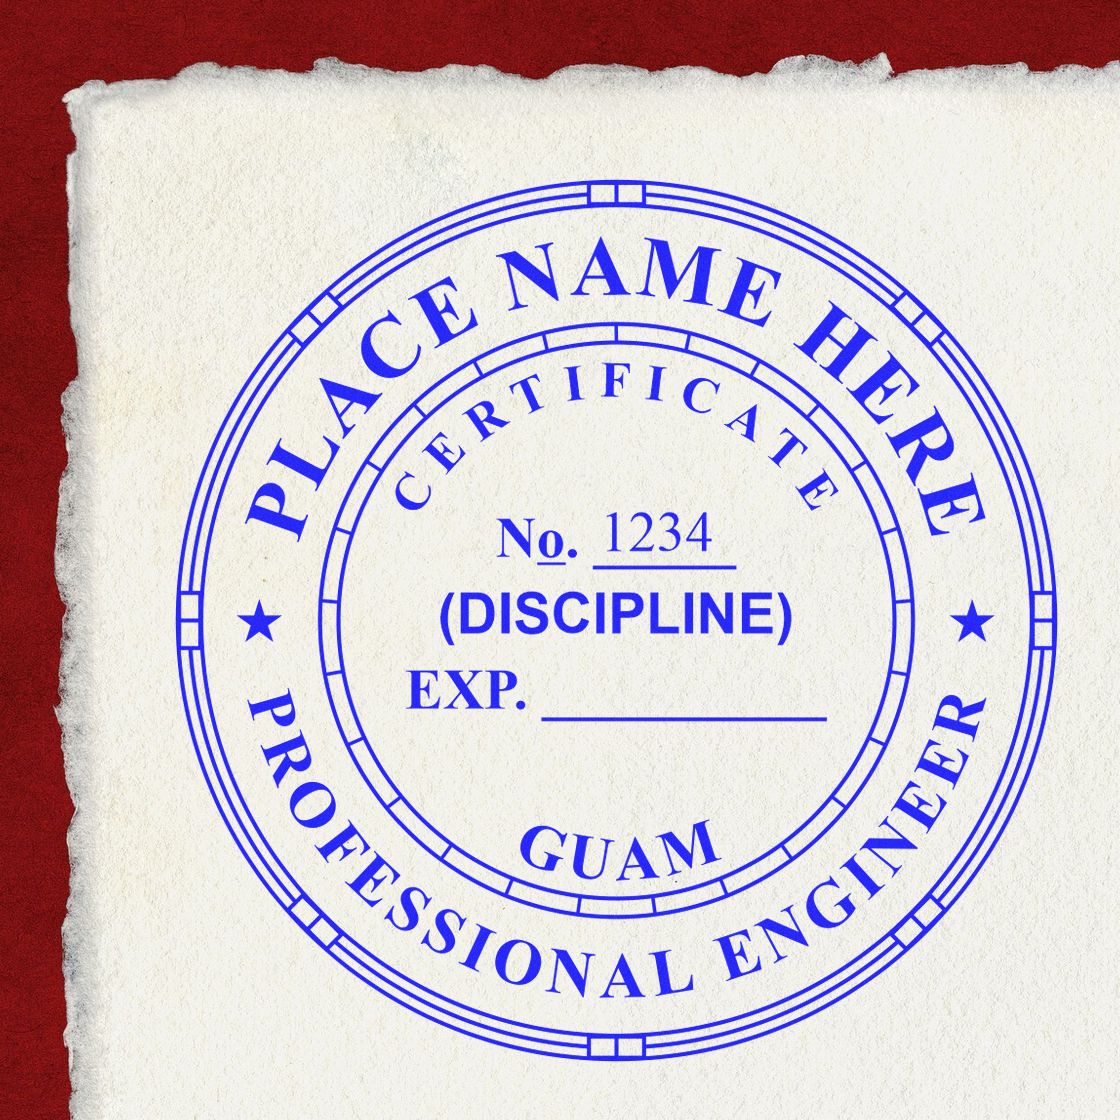 The main image for the Premium MaxLight Pre-Inked Guam Engineering Stamp depicting a sample of the imprint and electronic files